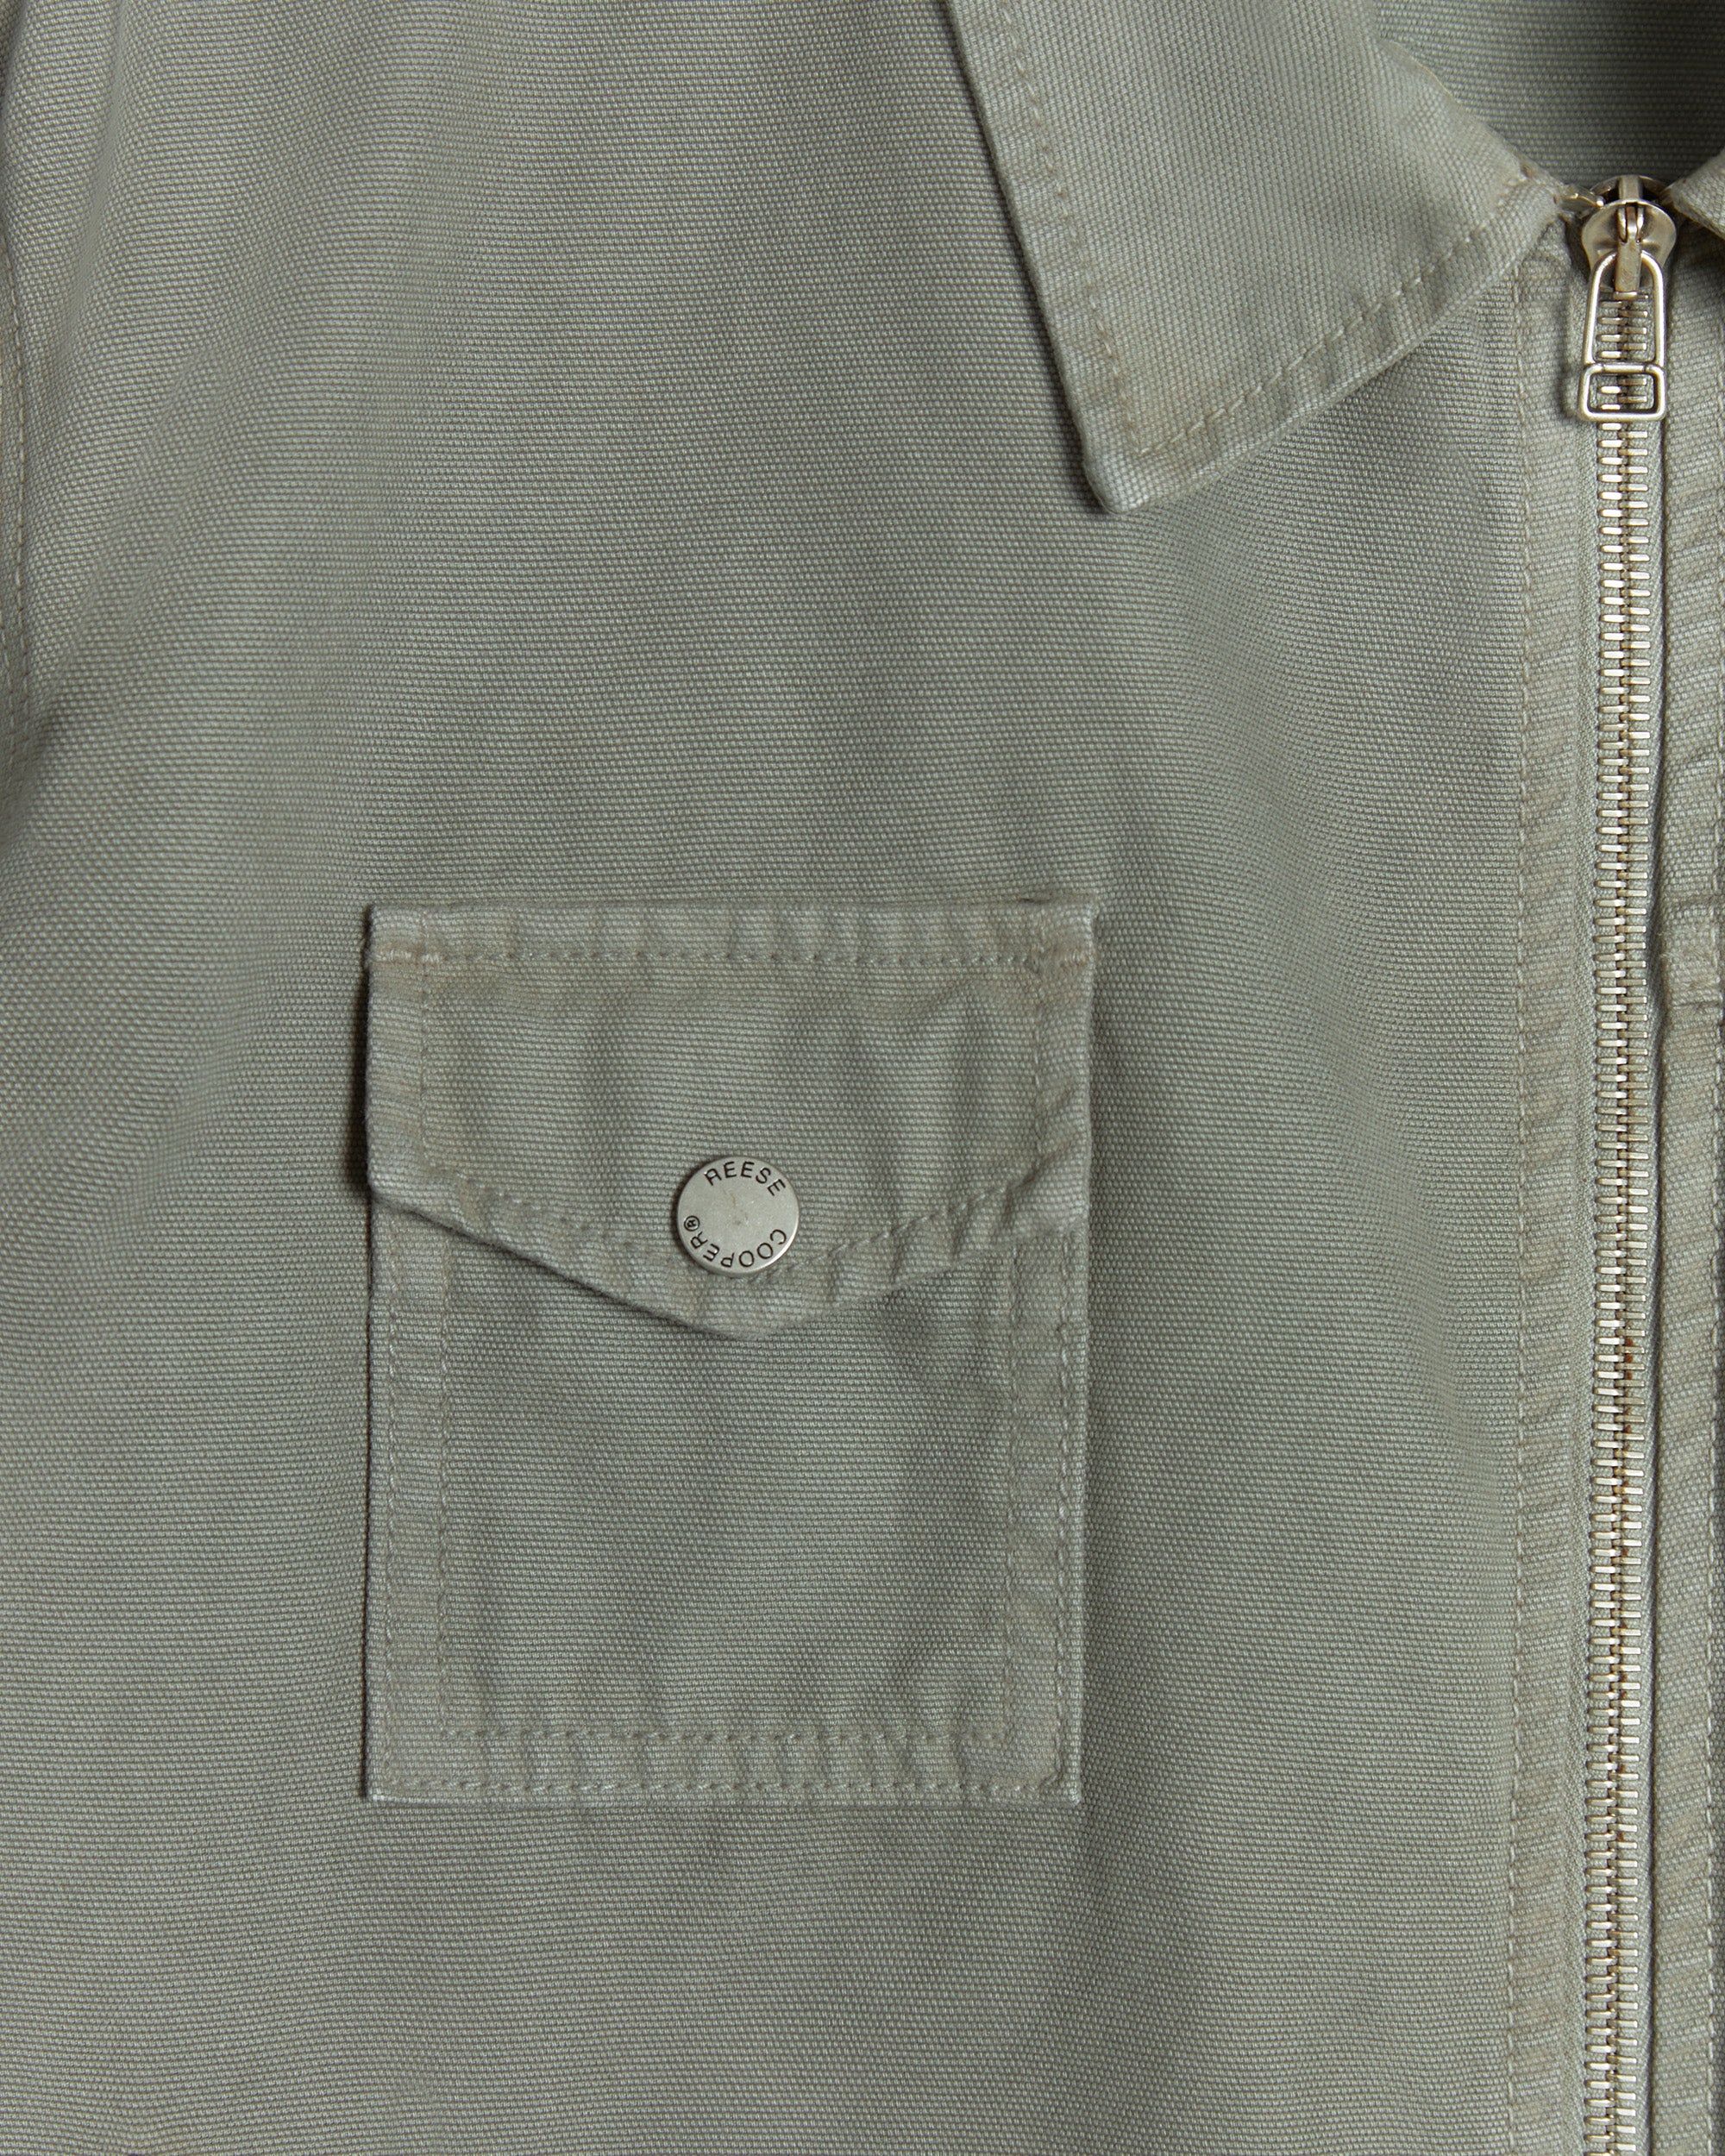 Research Division Garment Dyed Work Jacket in Sage